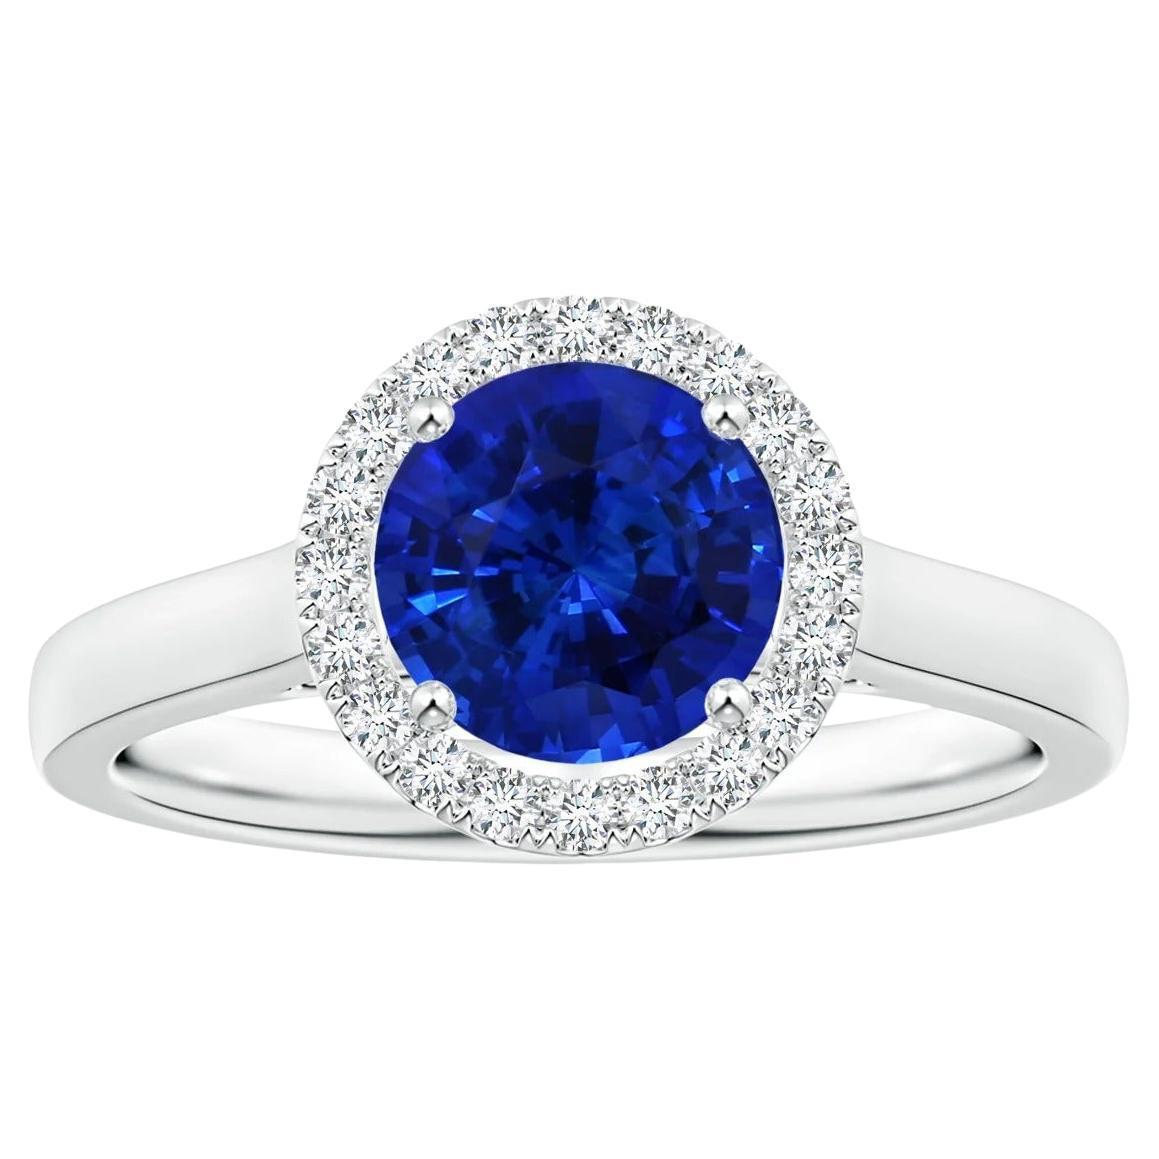 For Sale:  Angara Gia Certified Natural Round Blue Sapphire Ring in White Gold with Halo